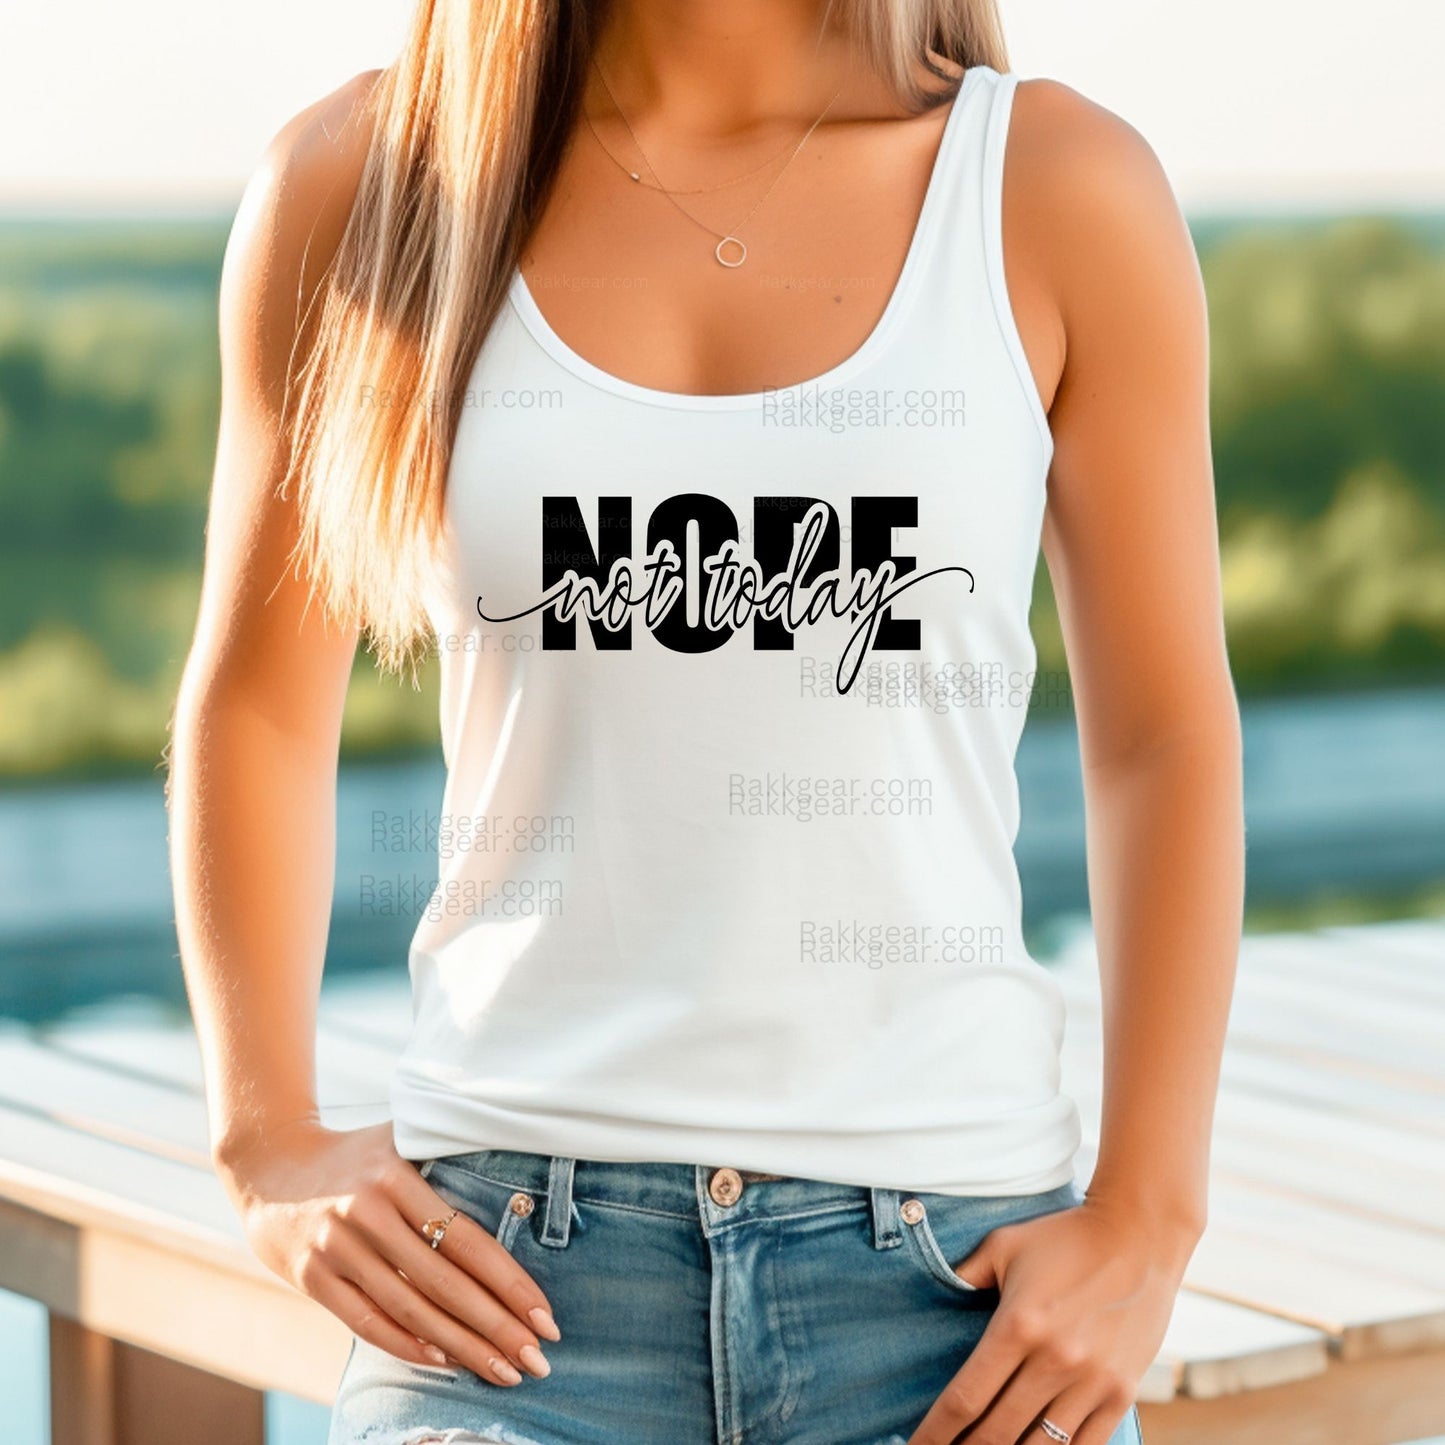 Rakkgear Women's White Tank Top with 'Nope Not Today' slogan on the front, featuring the Rakkgear logo on the upper inner back.